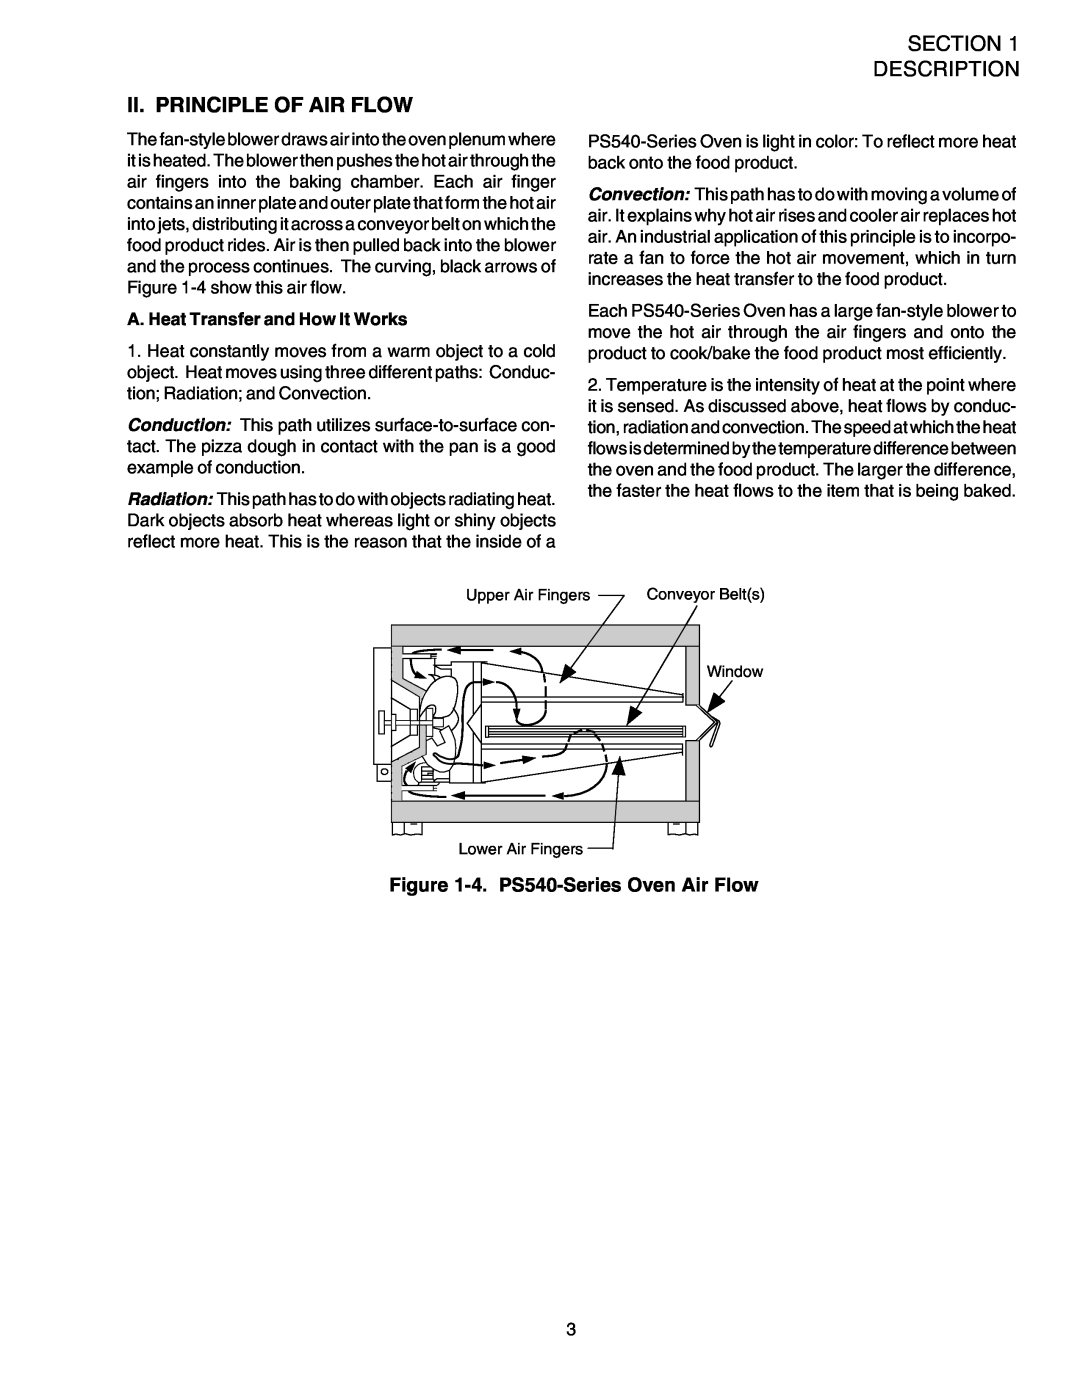 Middleby Marshall installation manual Section Description, Ii. Principle Of Air Flow, 4. PS540-SeriesOven Air Flow 